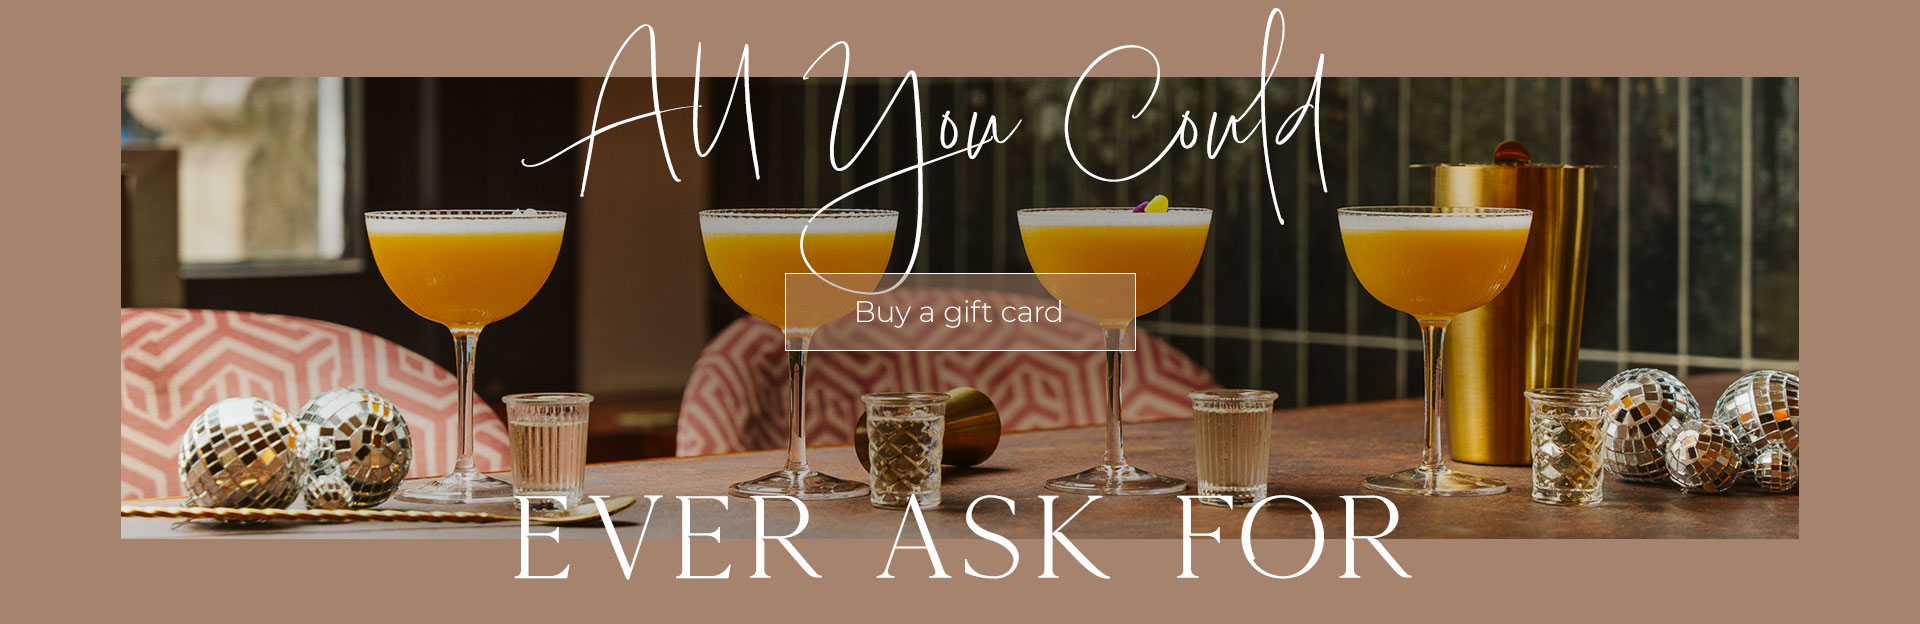 All Bar One Gift Cards at All Bar One Manchester